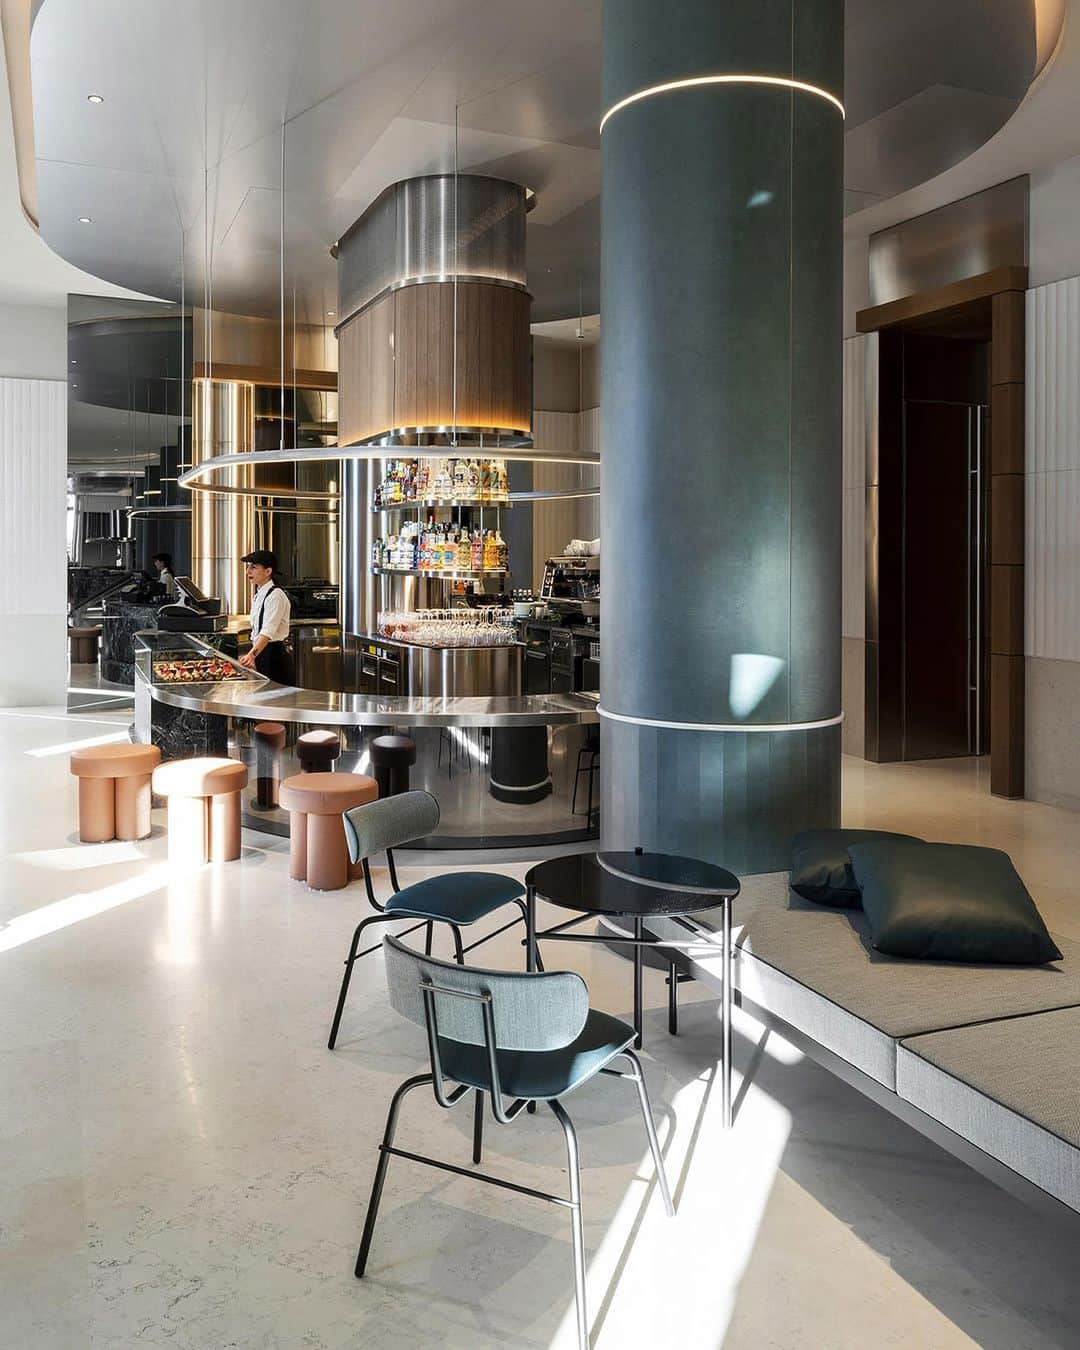 Poltrona Frauのインスタグラム：「Get ready for an incredible experience at @palazzotirsocagliari - @mgalleryhotels, the brand-new 5-star boutique hotel in Cagliari, Sardinia. Designed by @studiomarcopiva, this hotel is a chance to discover Poltrona Frau’s products firsthand.   Facing the city’s marina, the location is an ideal spot from which to immerse yourself in the wonders of the "City of the Sun" as you explore its historic neighborhoods – the same neighbourhoods that Renzo Frau, founder of Poltrona Frau, would have walked more than a century ago.   Ph: Andrea Martiradonna  #PoltronaFrau  #PFCustomInteriors」